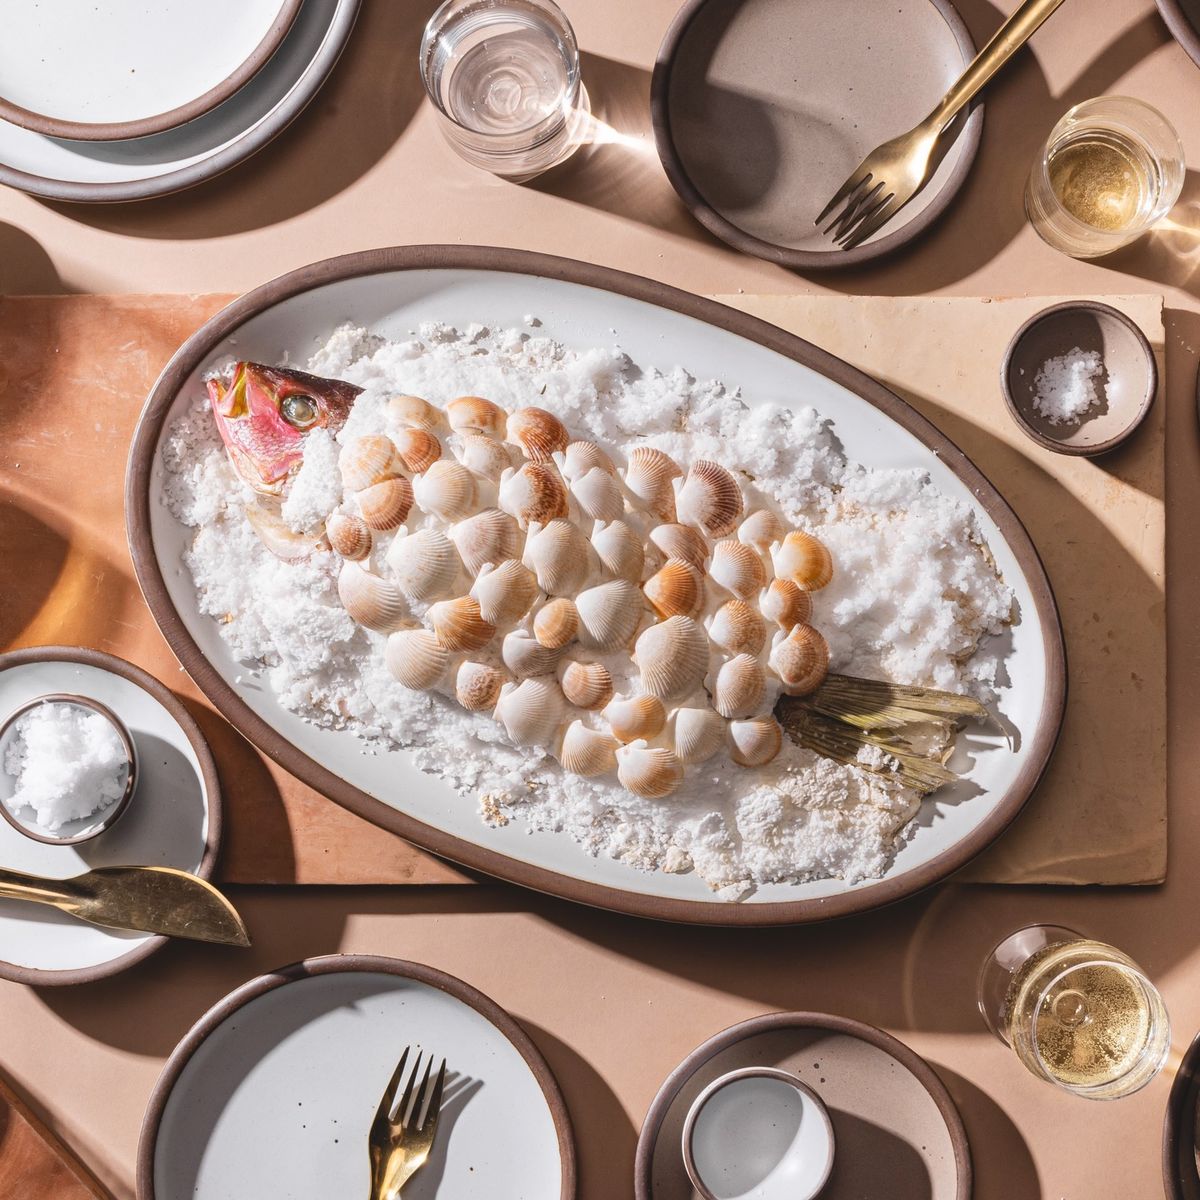 A ceramic oval platter in a cool white color with a large fish covered in salt and seashells. The platter is surrounded by plates in cool white and taupe colors and brass forks and knives.